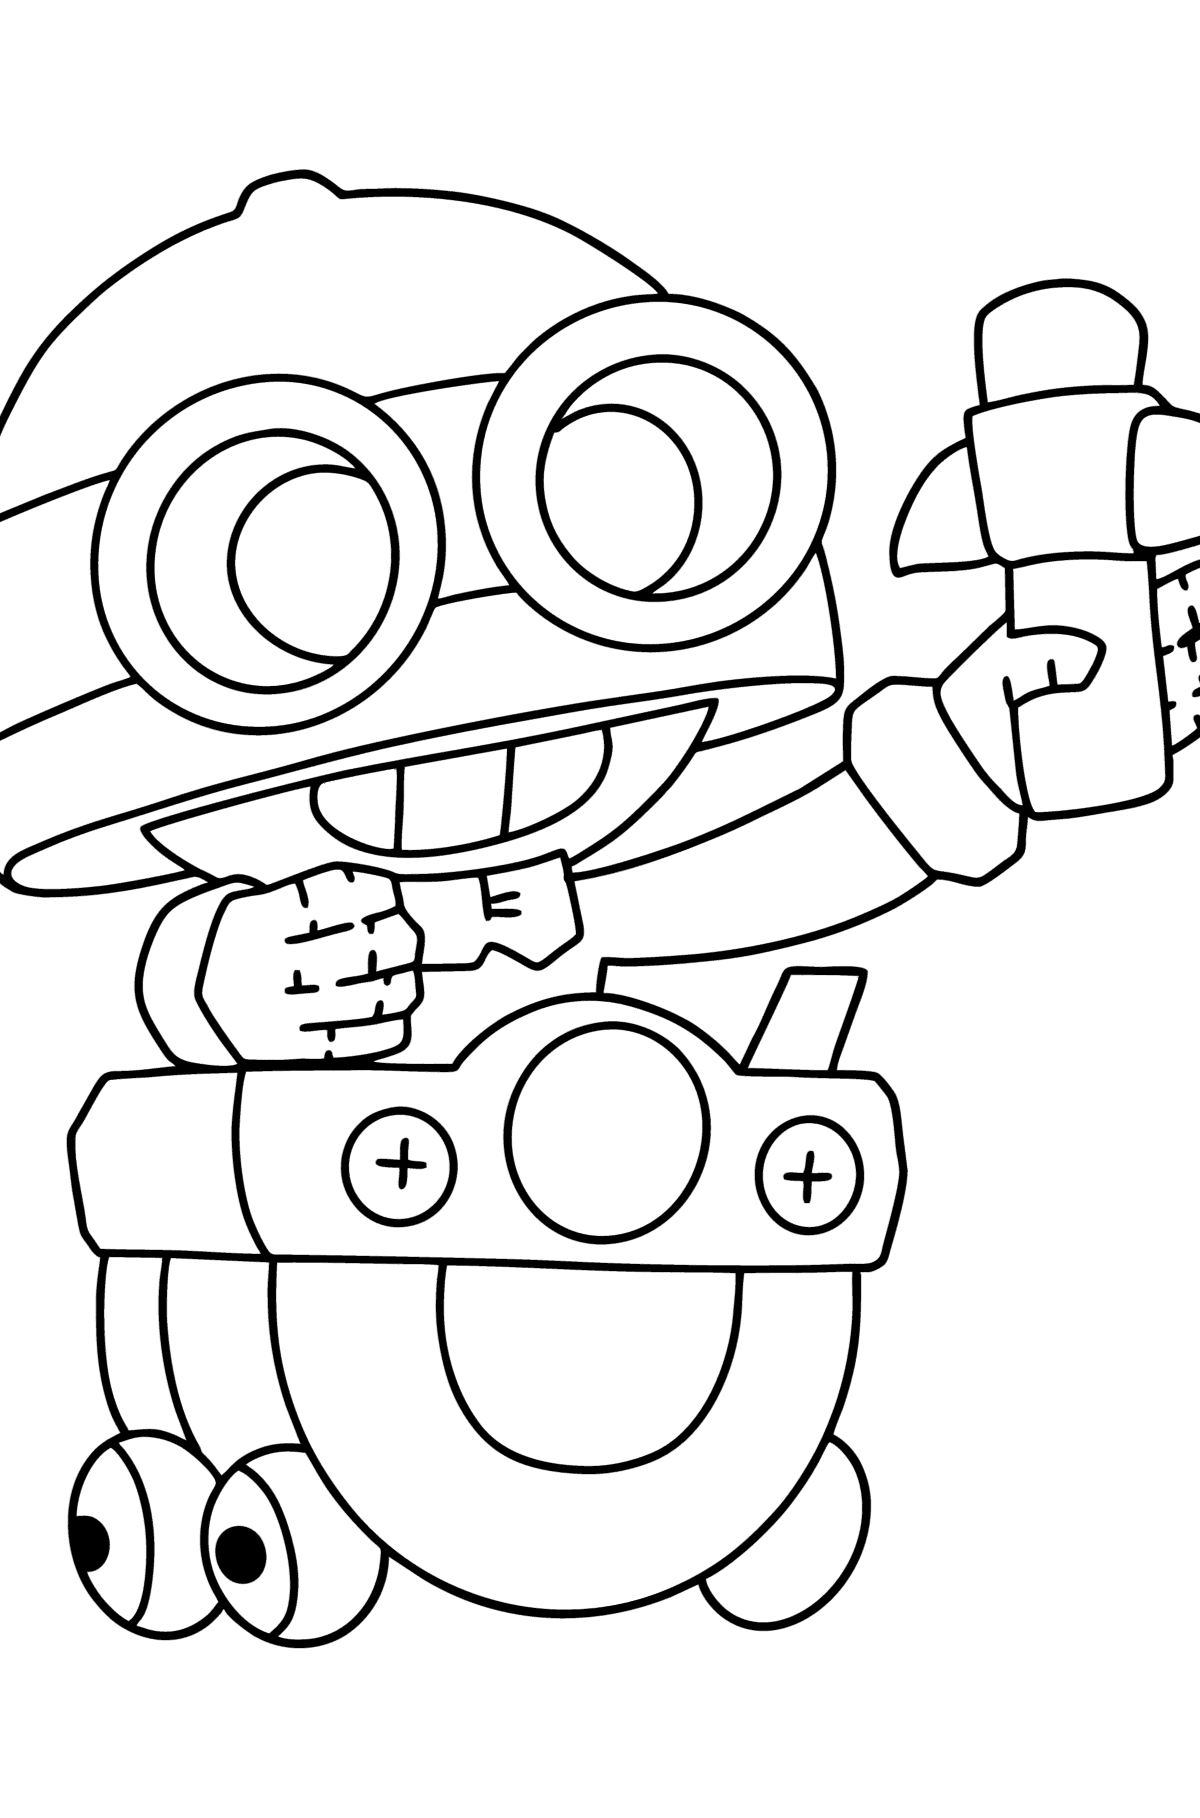 Brawl Stars Carl coloring page - Coloring Pages for Kids